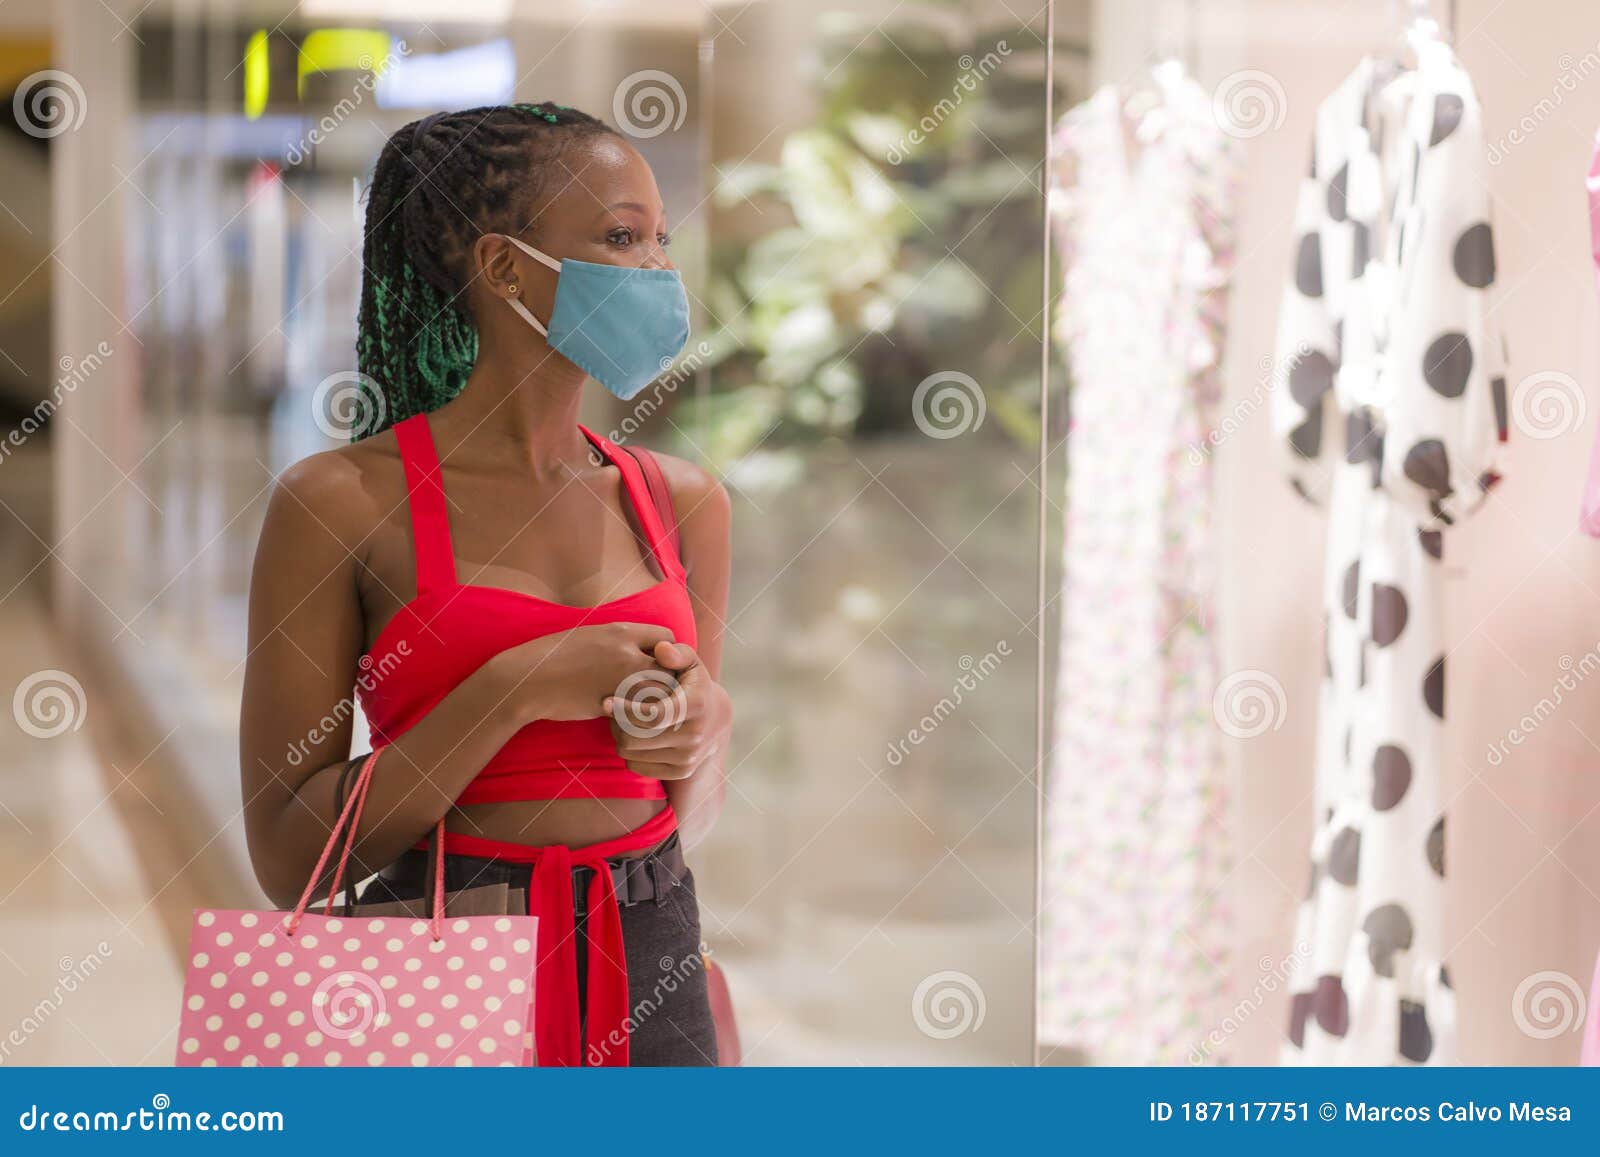 Young Afro American Woman at Shopping Mall in New Normal after Covid-19 ...